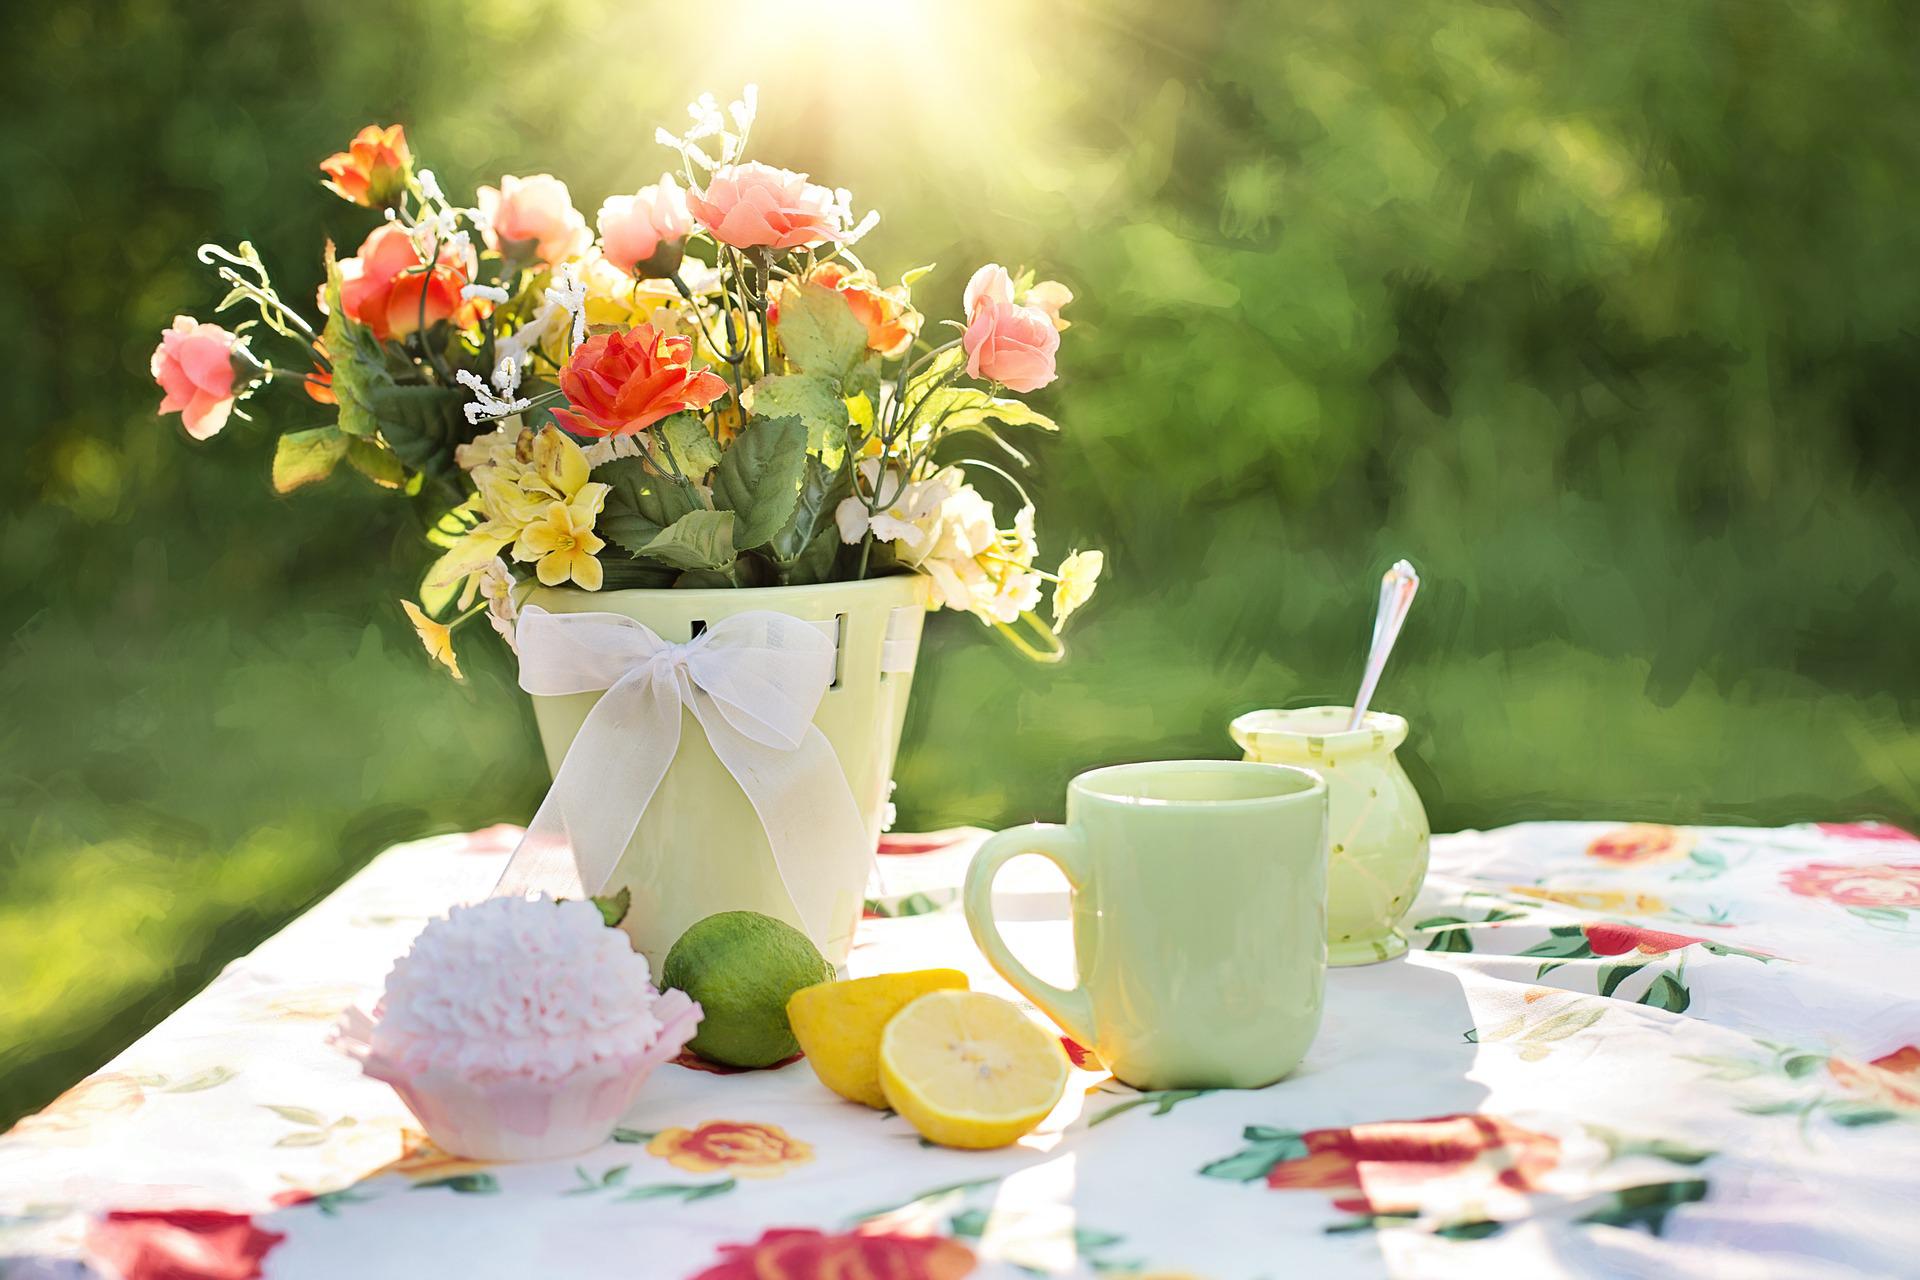 Vase of Flowers on Outdoor Table - Summer